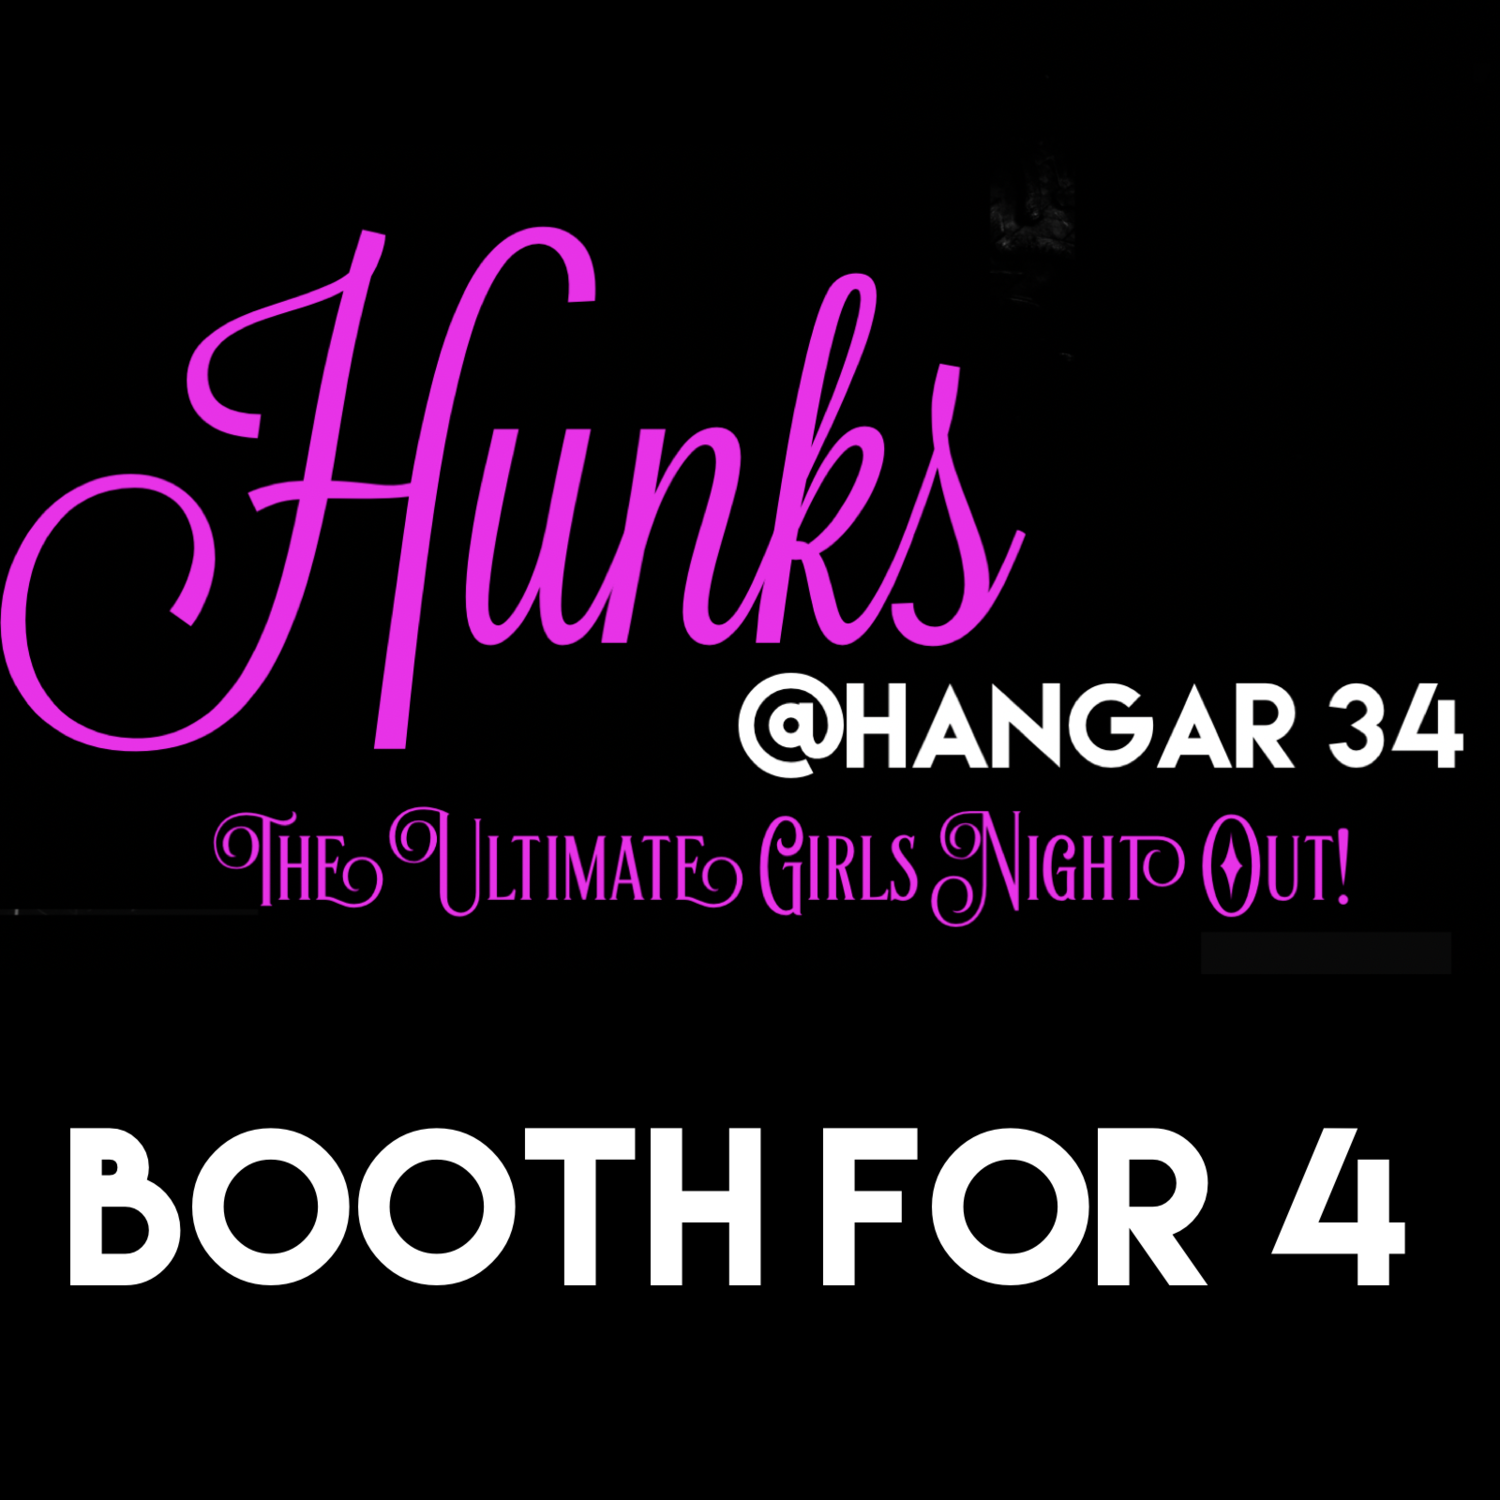 (MM39) Hunks @Hangar 34: Booth For 4 - Friday 19th October